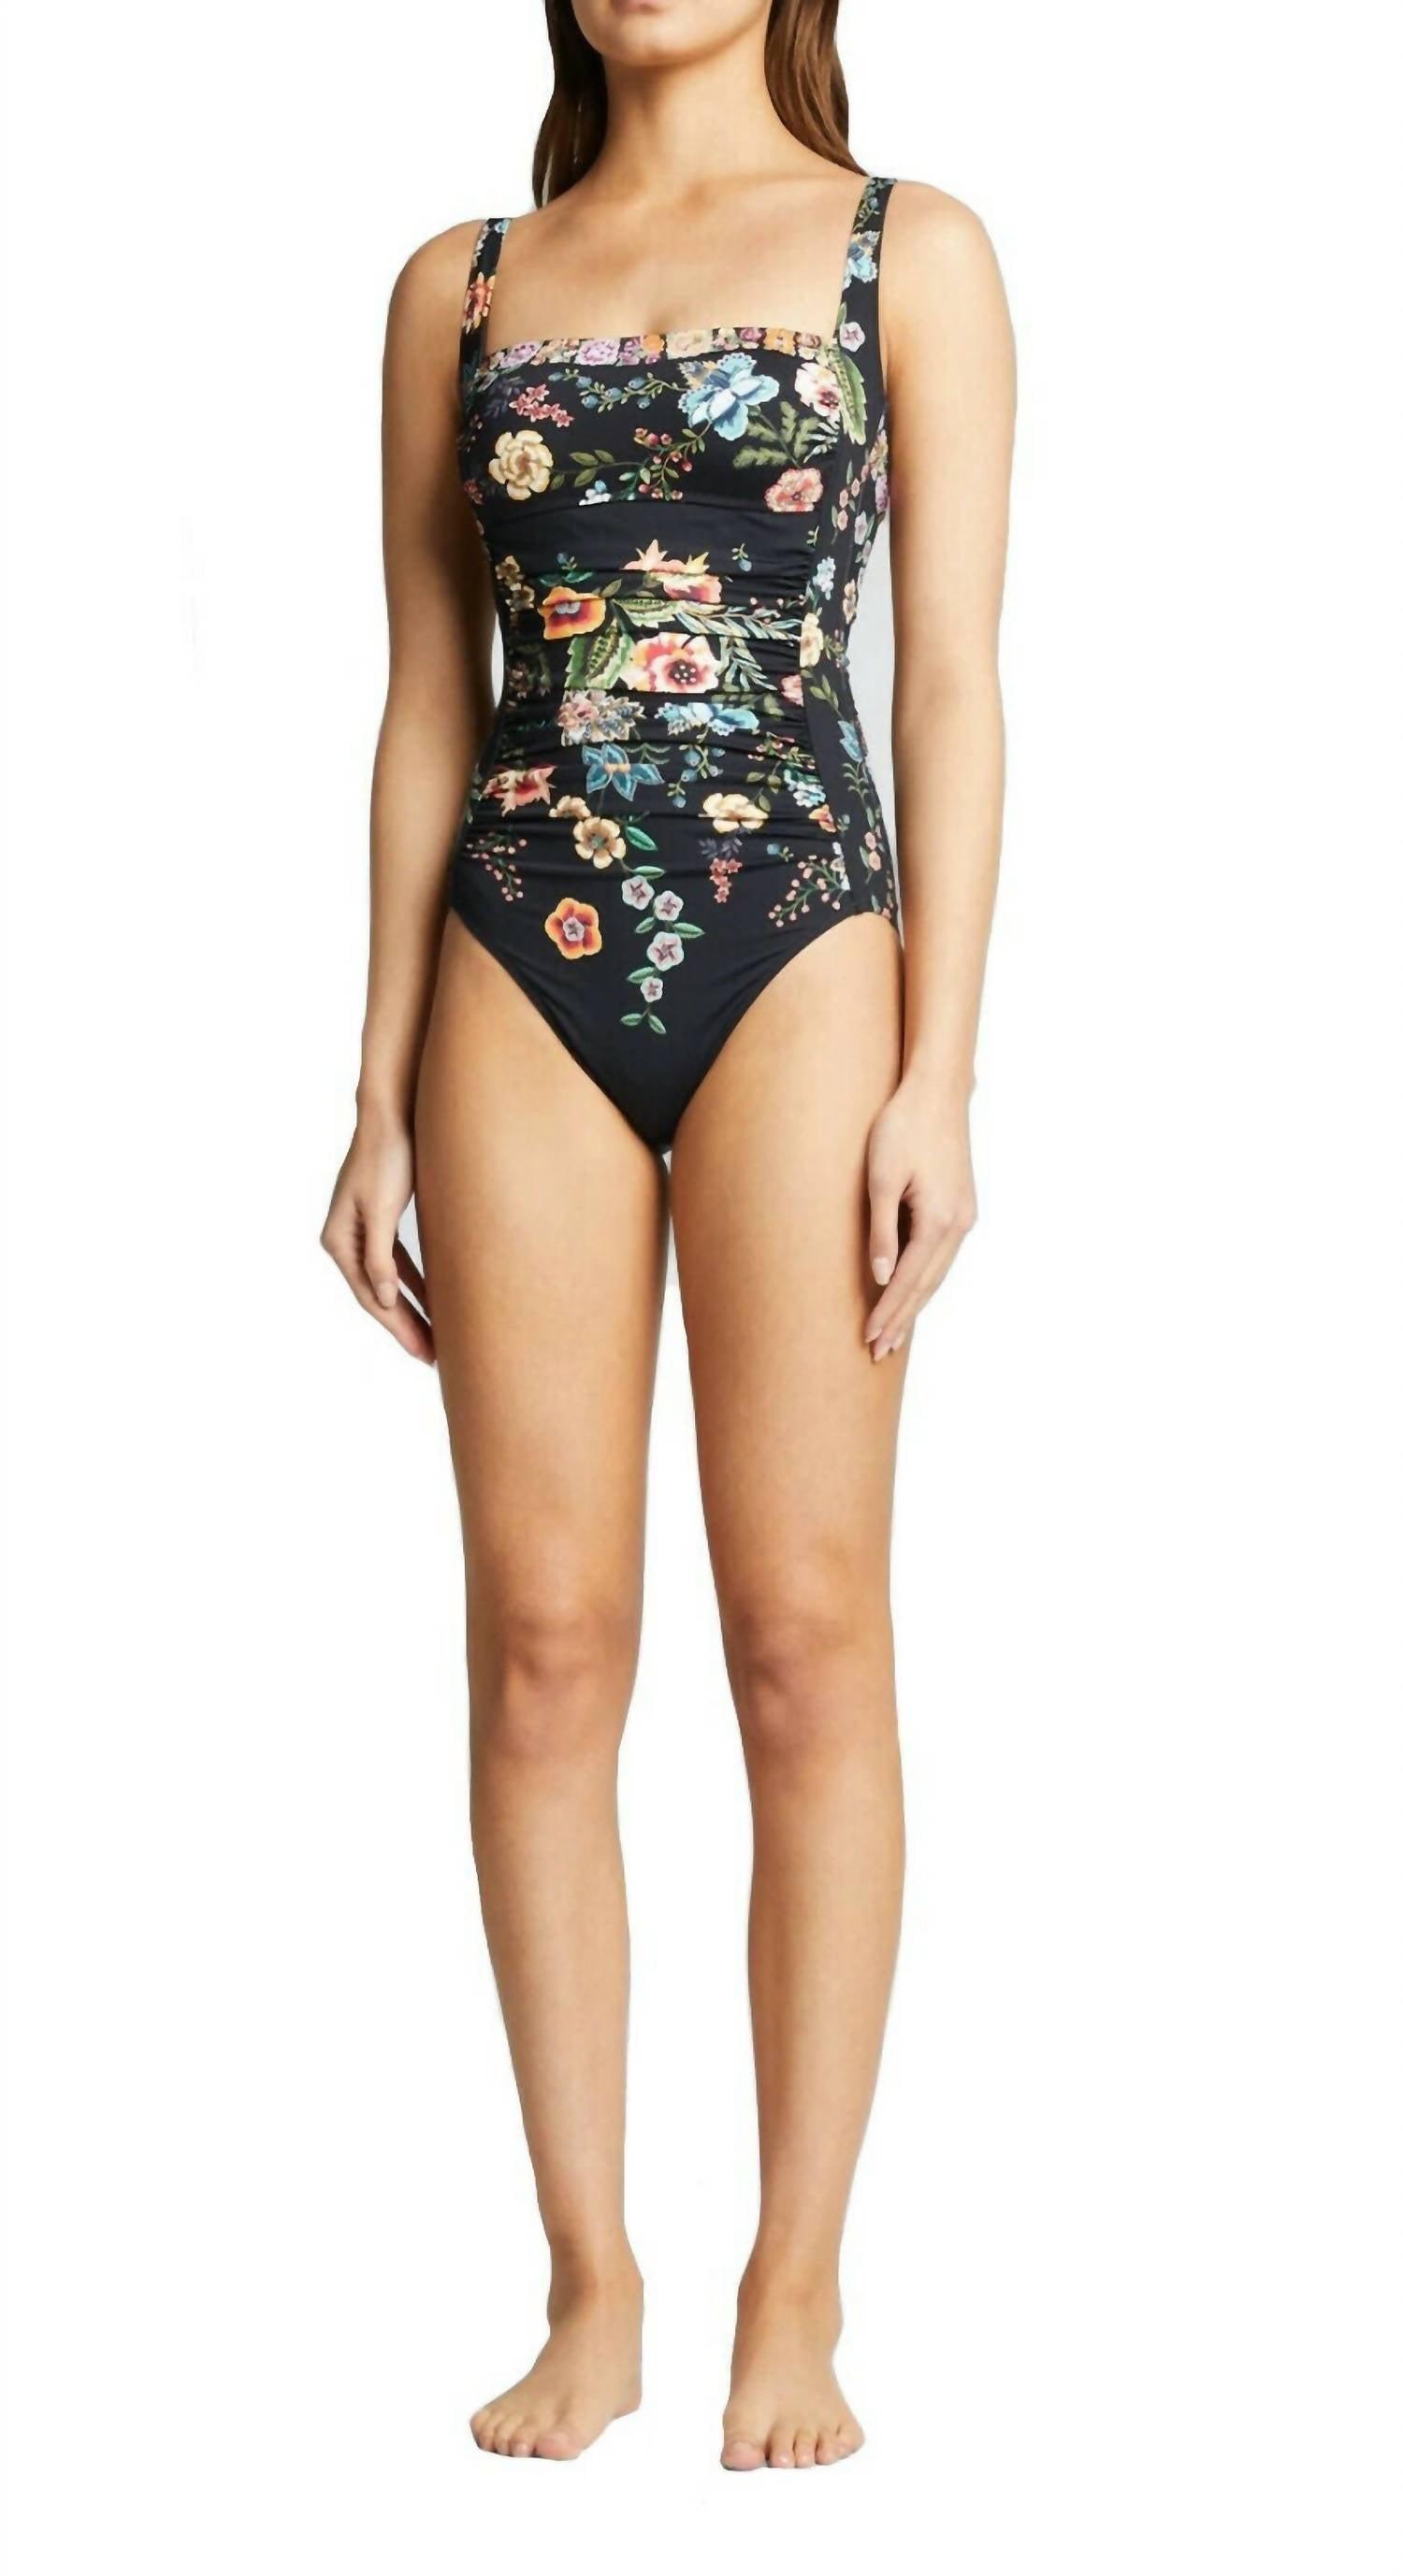 Heat Of The Moment Shirred Bandeau One-Piece Swimsuit